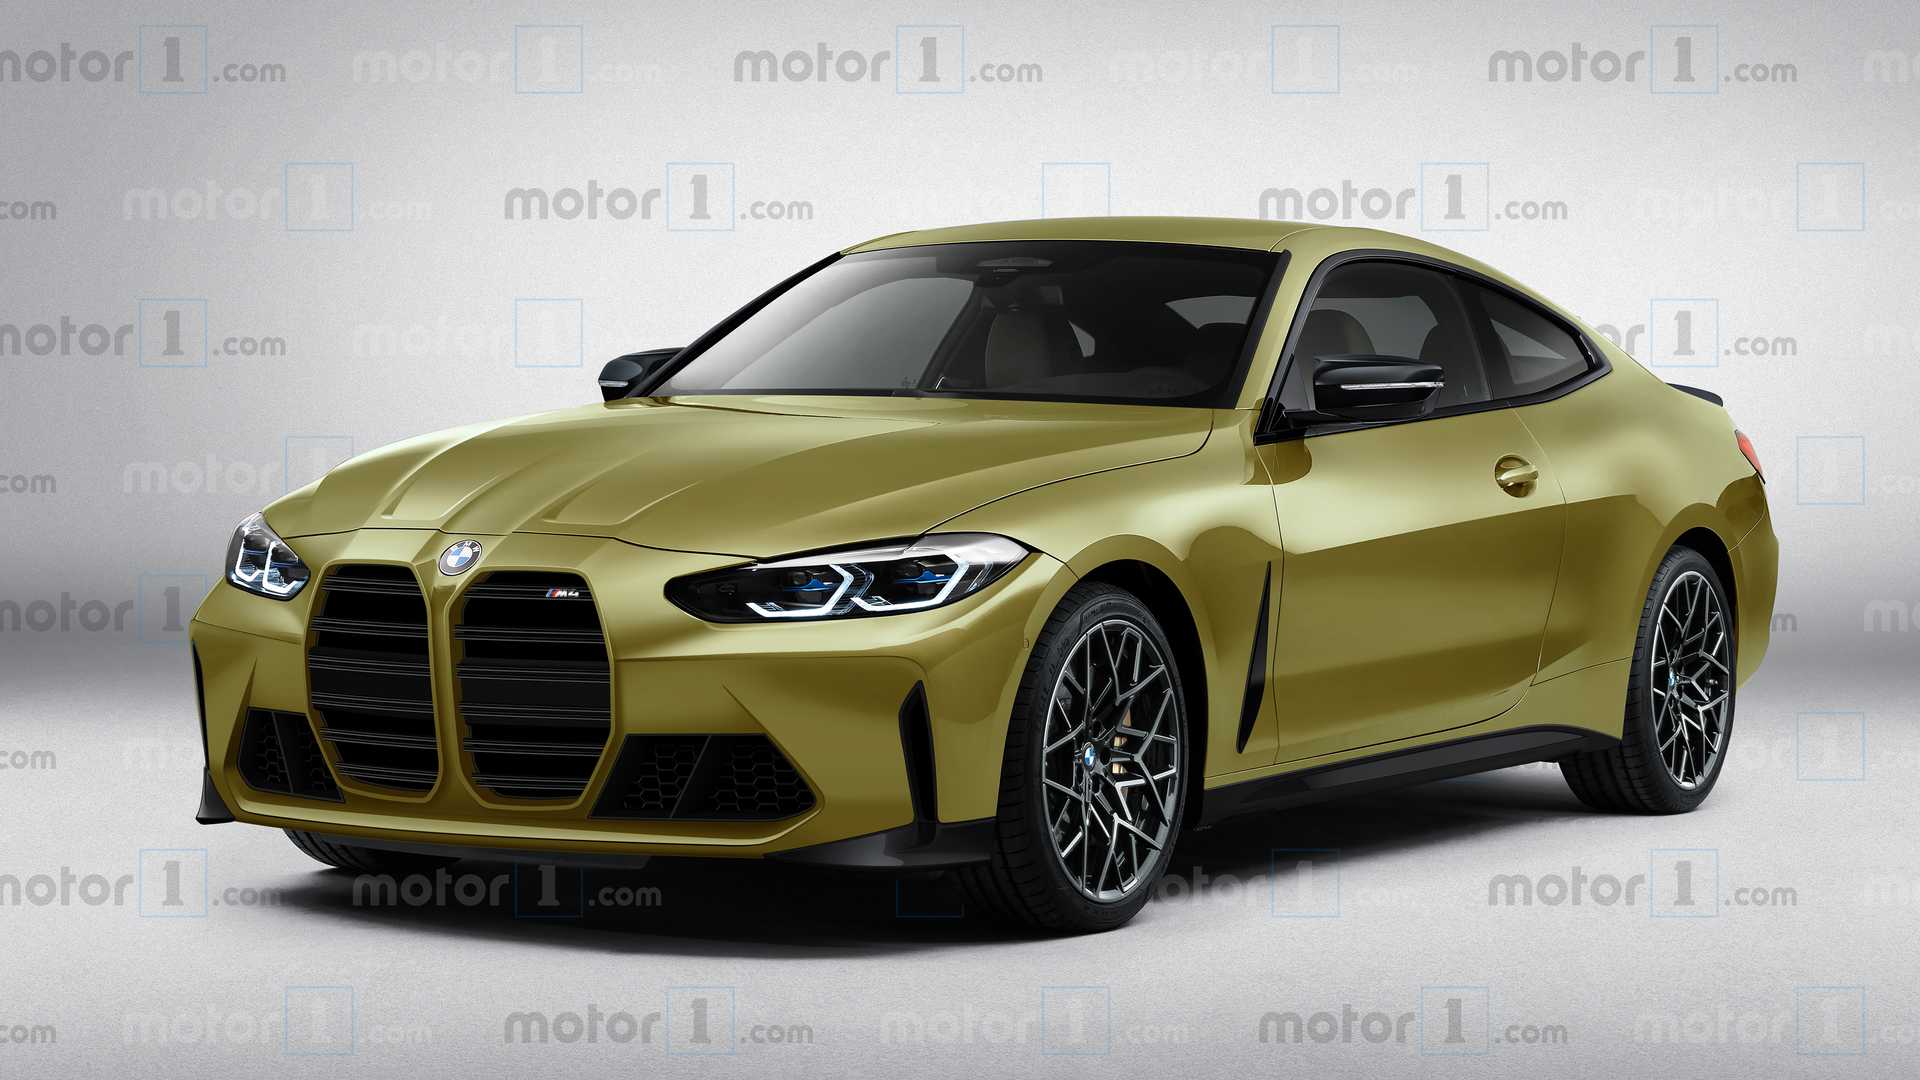 2021-bmw-m4-coupe-rendering-by-motor1.jpg